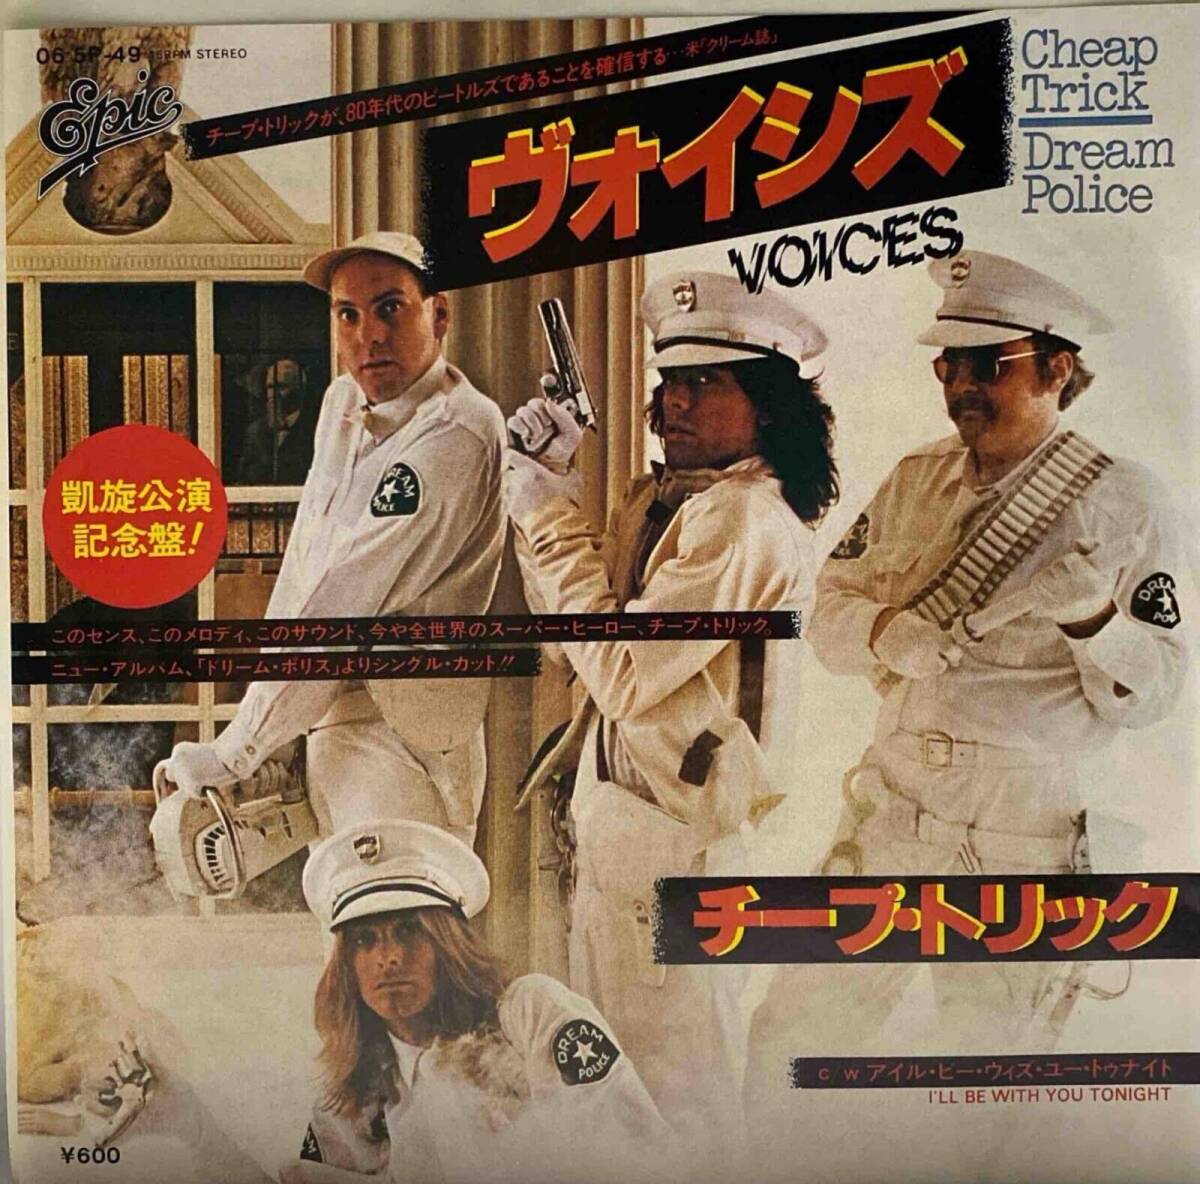 Cheap Trick - Voices - I'll Be with you tonight Japan バイナル 7" Single - 065P-49 海外 即決_Cheap Trick - Voic 1